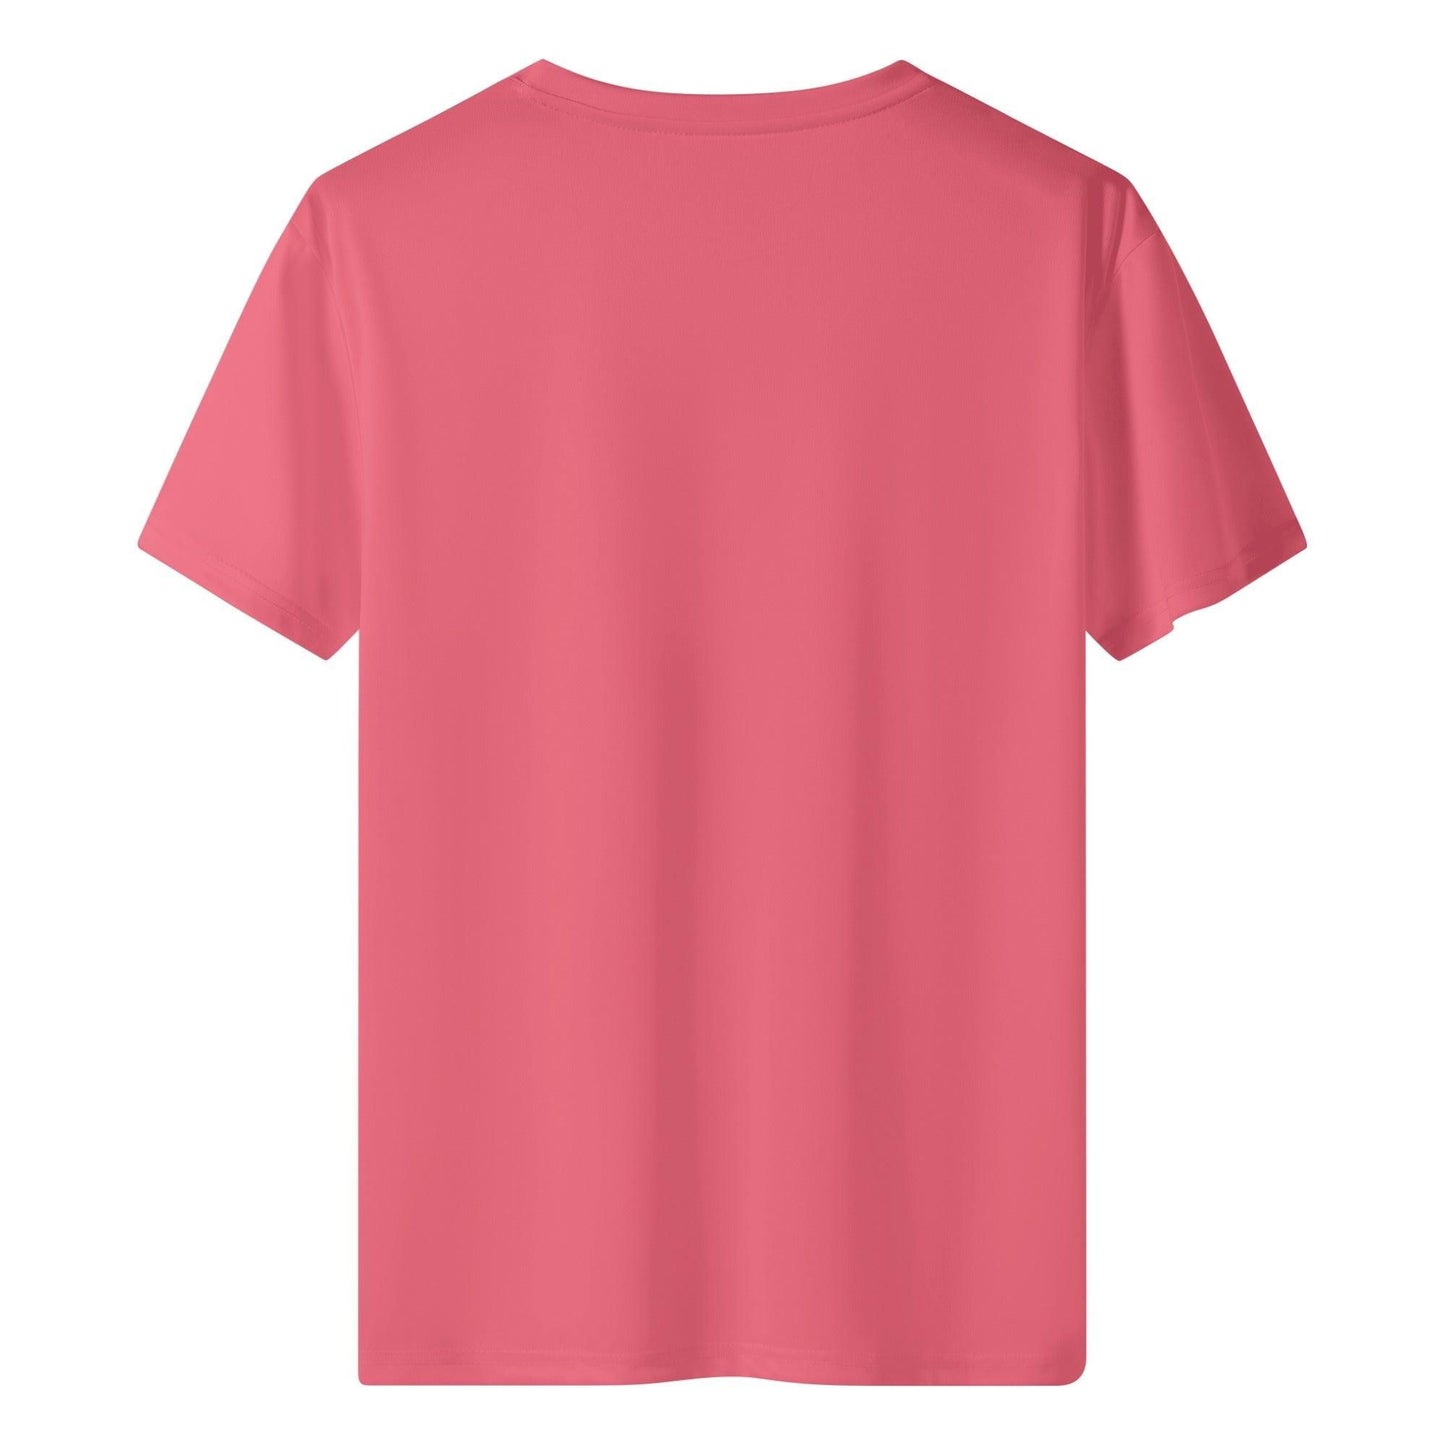 Cool Dude T-Shirt Pink - NX Vogue New York | Luxury Redefined